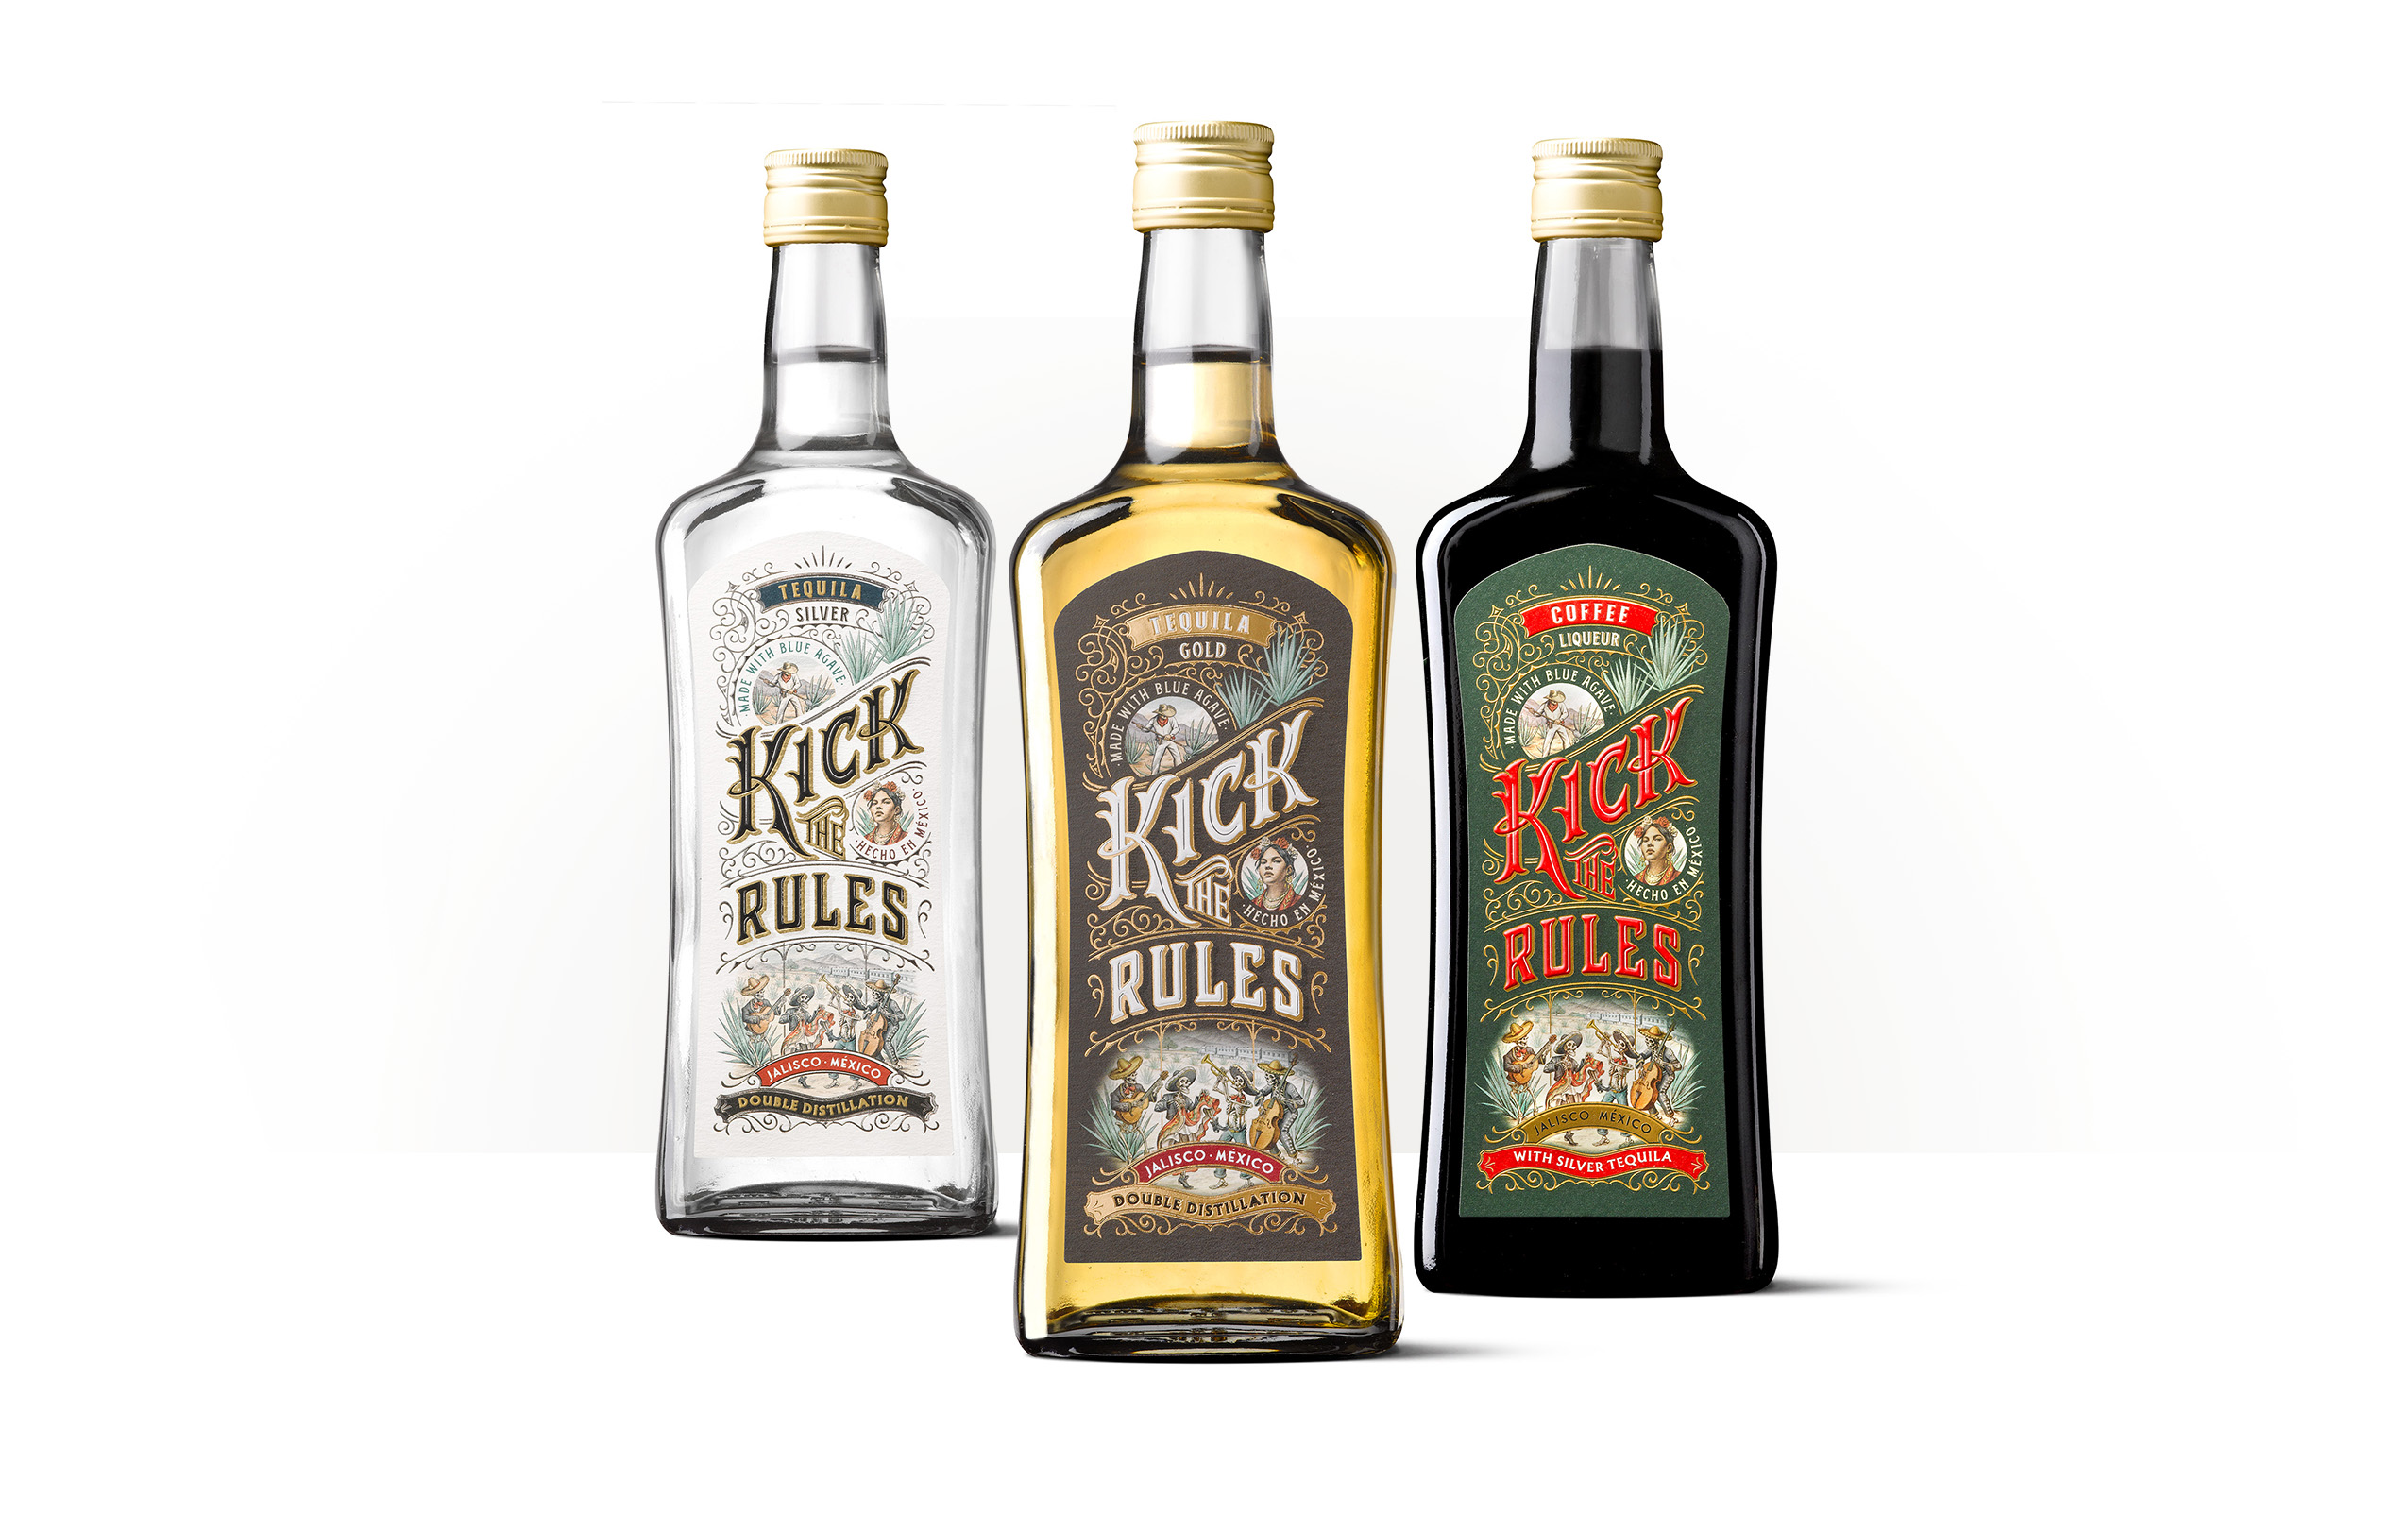 Kick the Rules Tequila Label Design